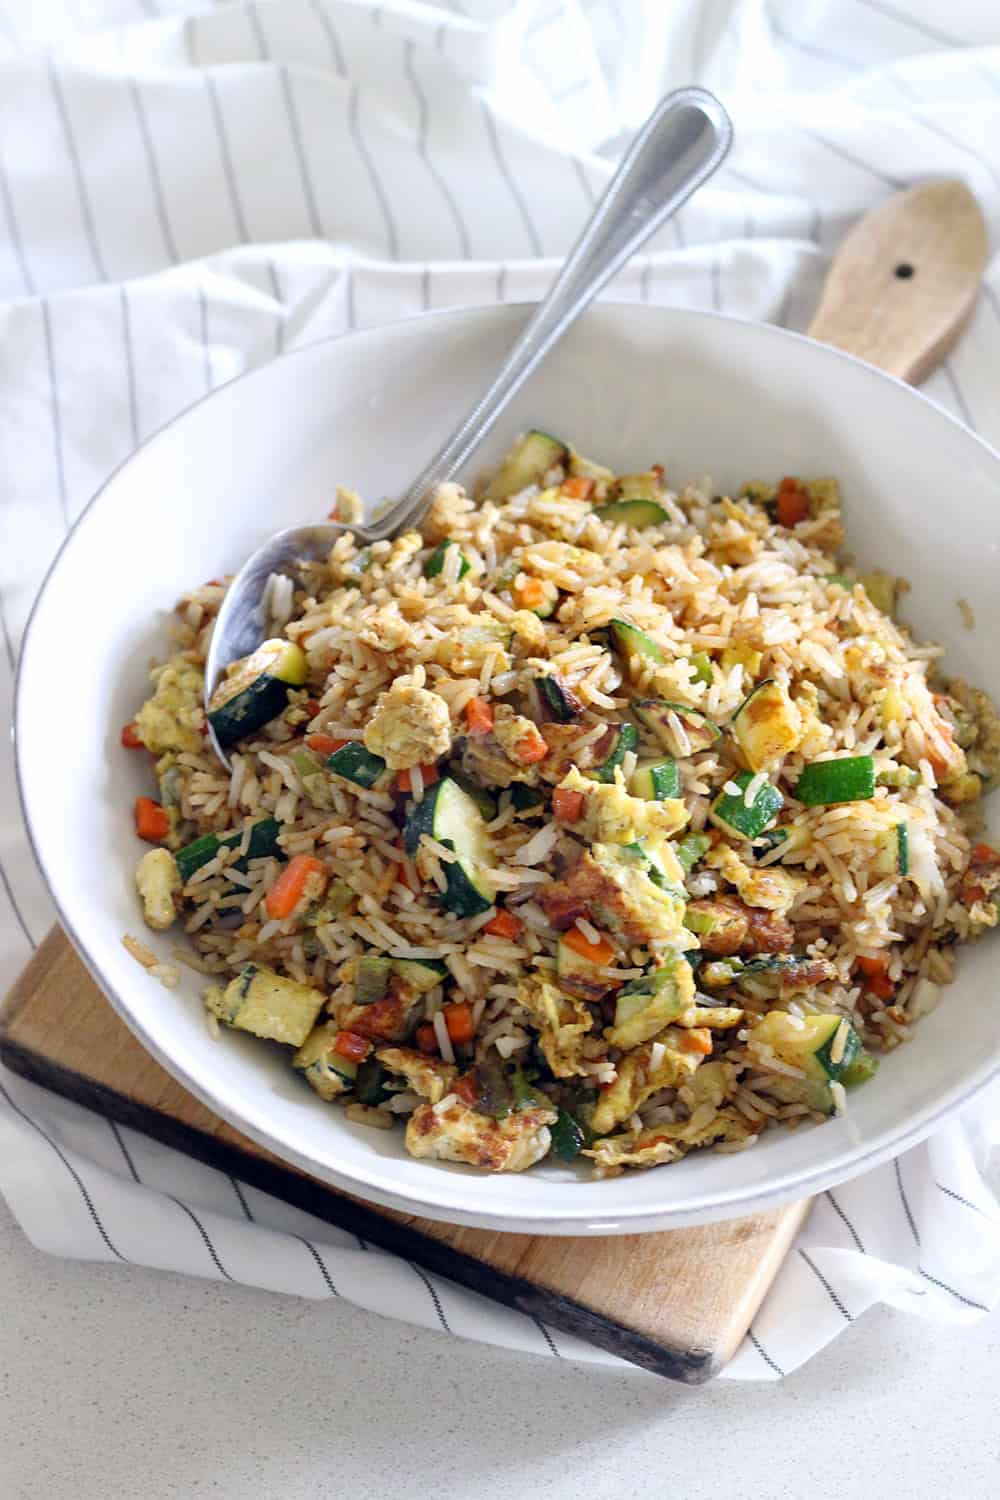 Ten minutes and six ingredients is all you need for this fresh, delicious veggie fried rice that's MUCH healthier than take-out!